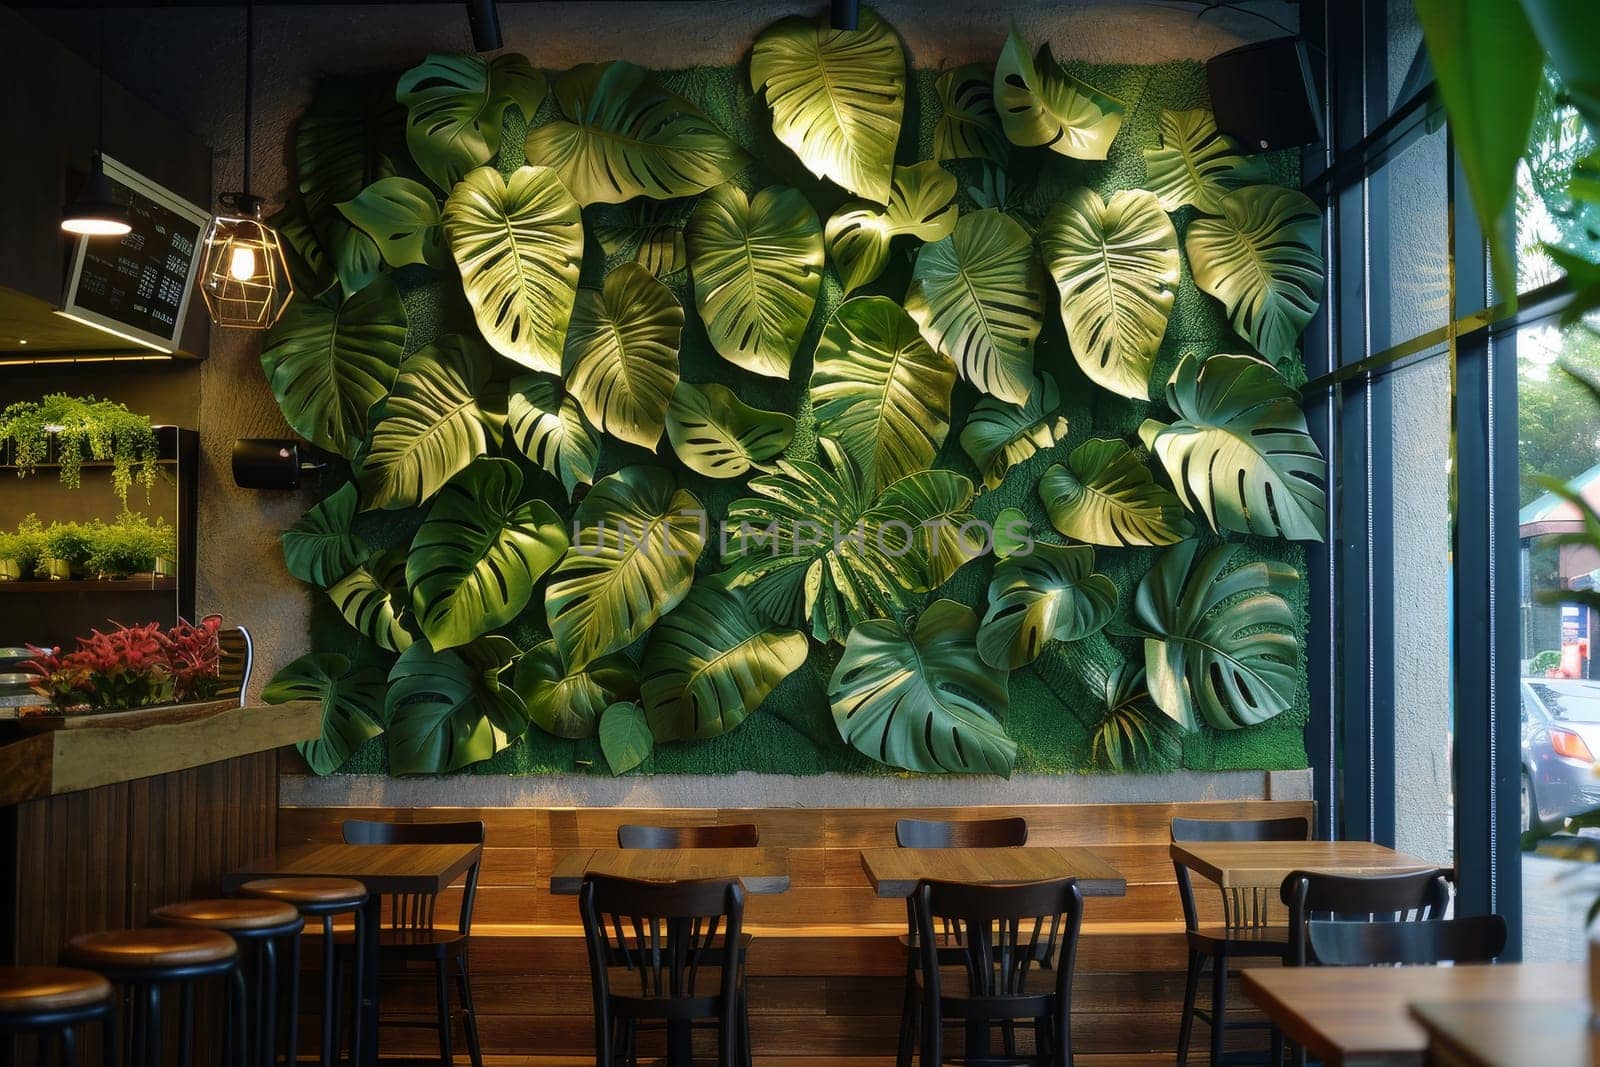 A restaurant with a green wall of leaves and a green wall of leaves. The chairs are black and the tables are wooden